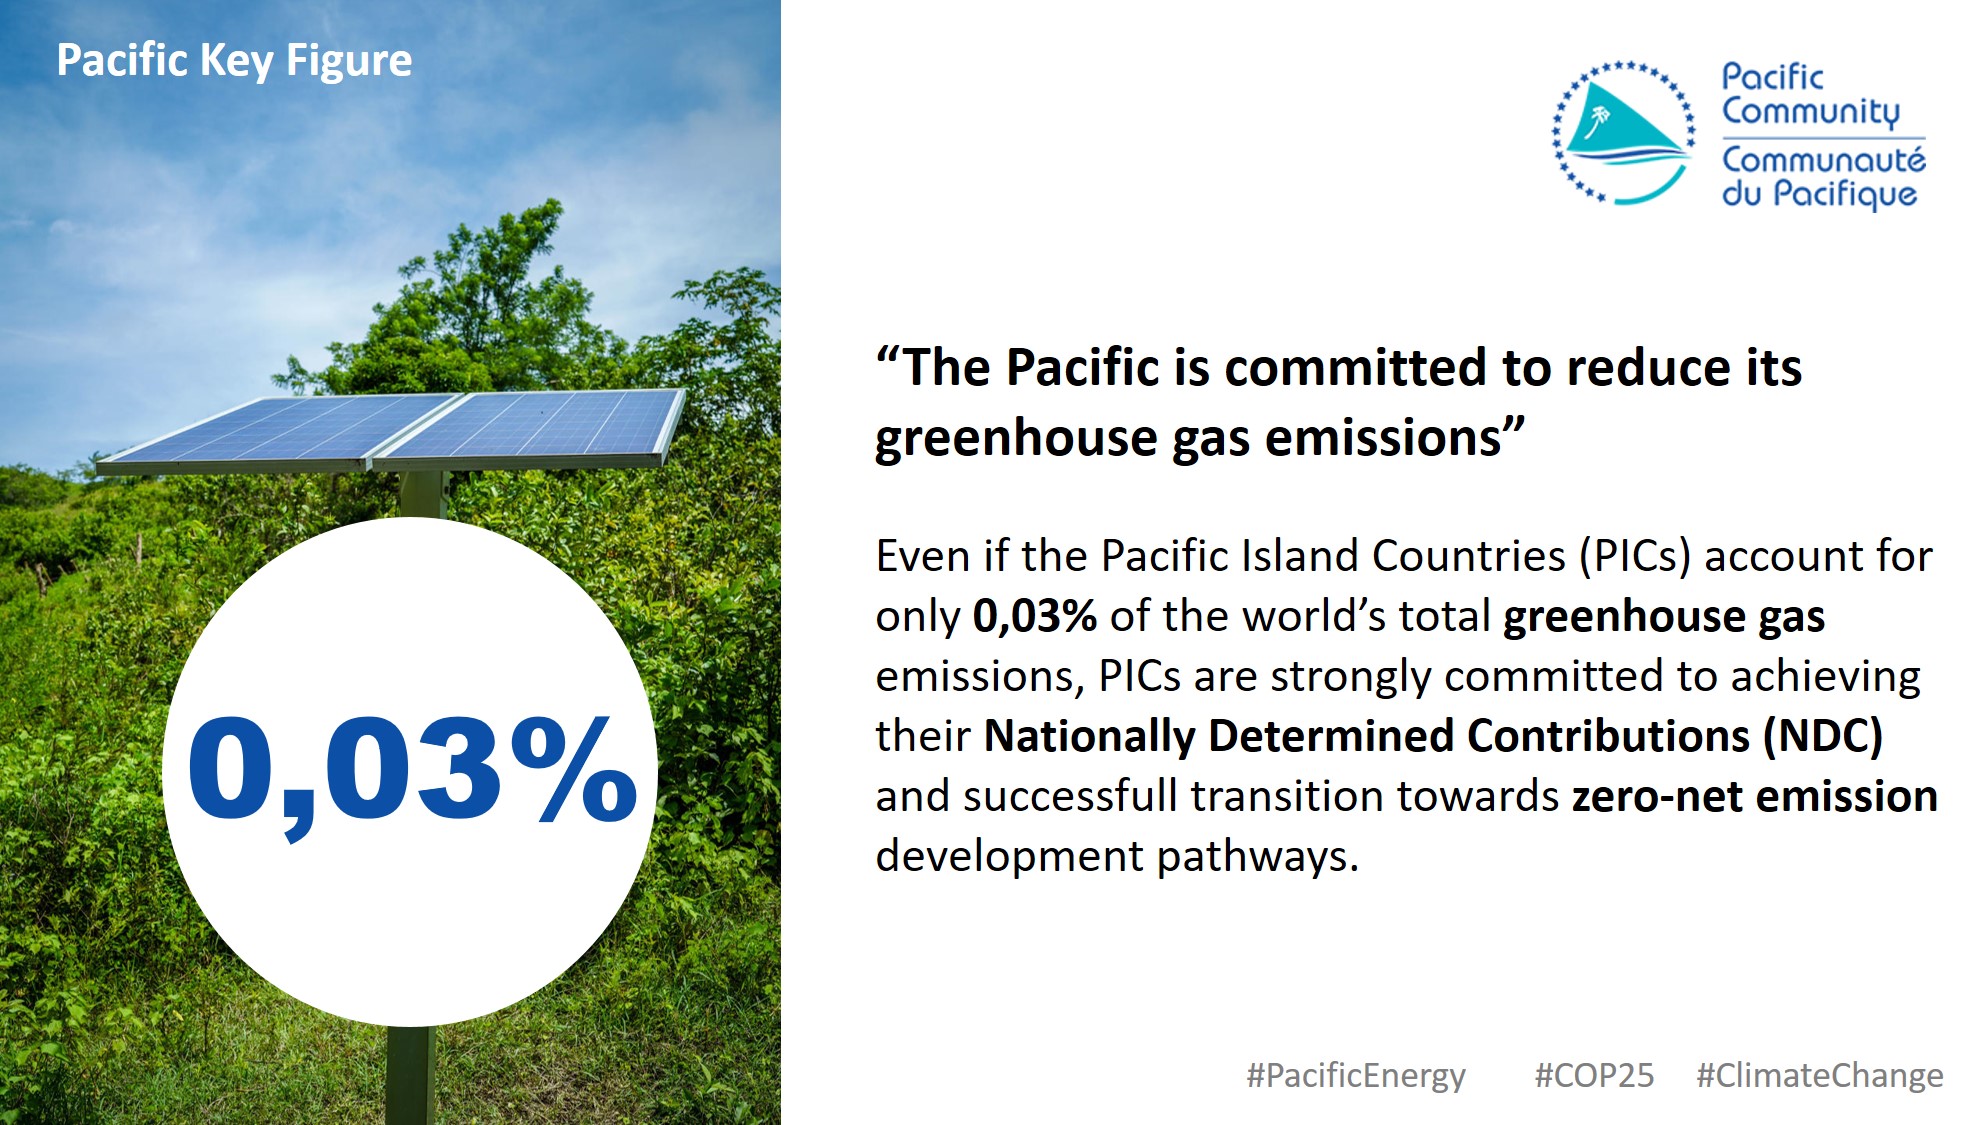 “The Pacific is committed to reduce its greenhouse gas emissions” 